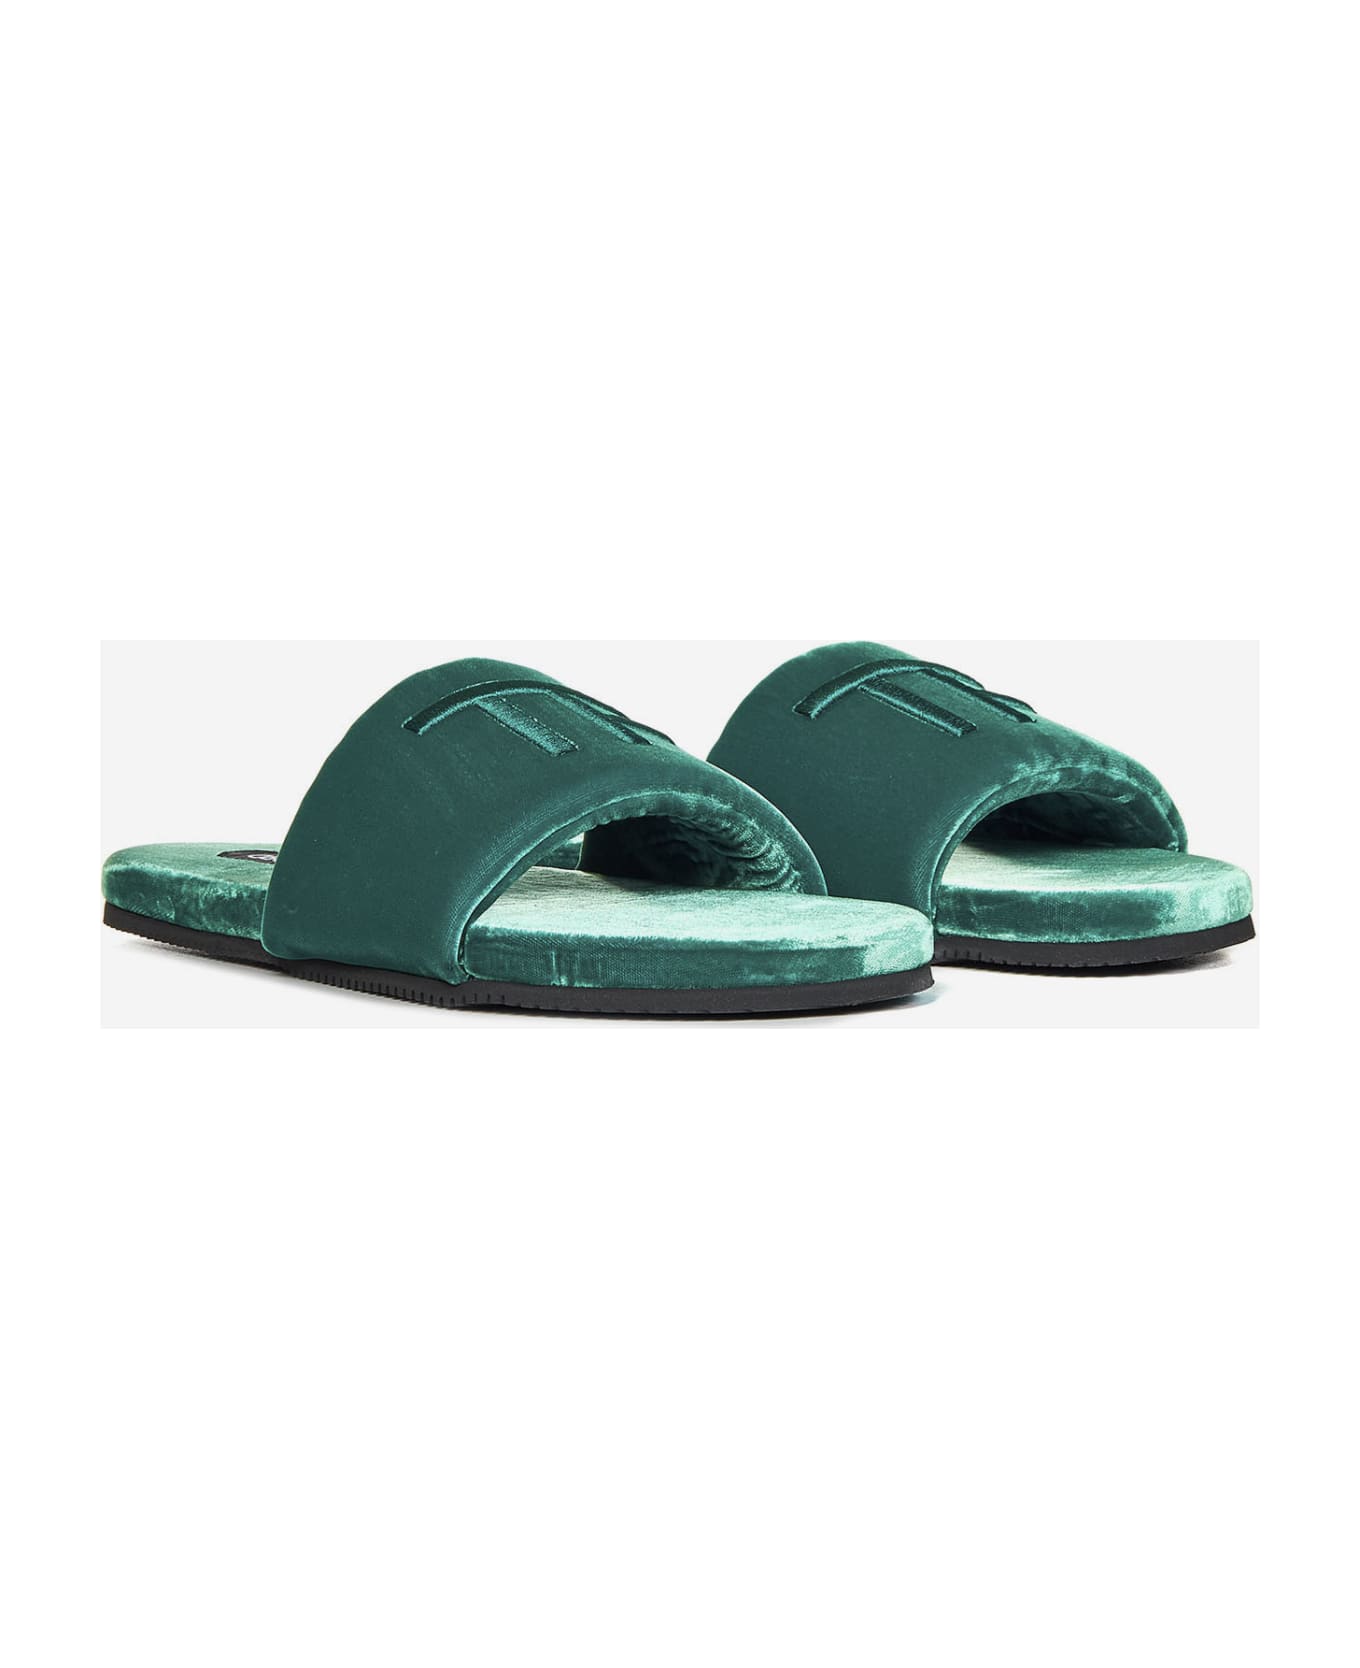 Tom Ford Sliders - GREEN その他各種シューズ